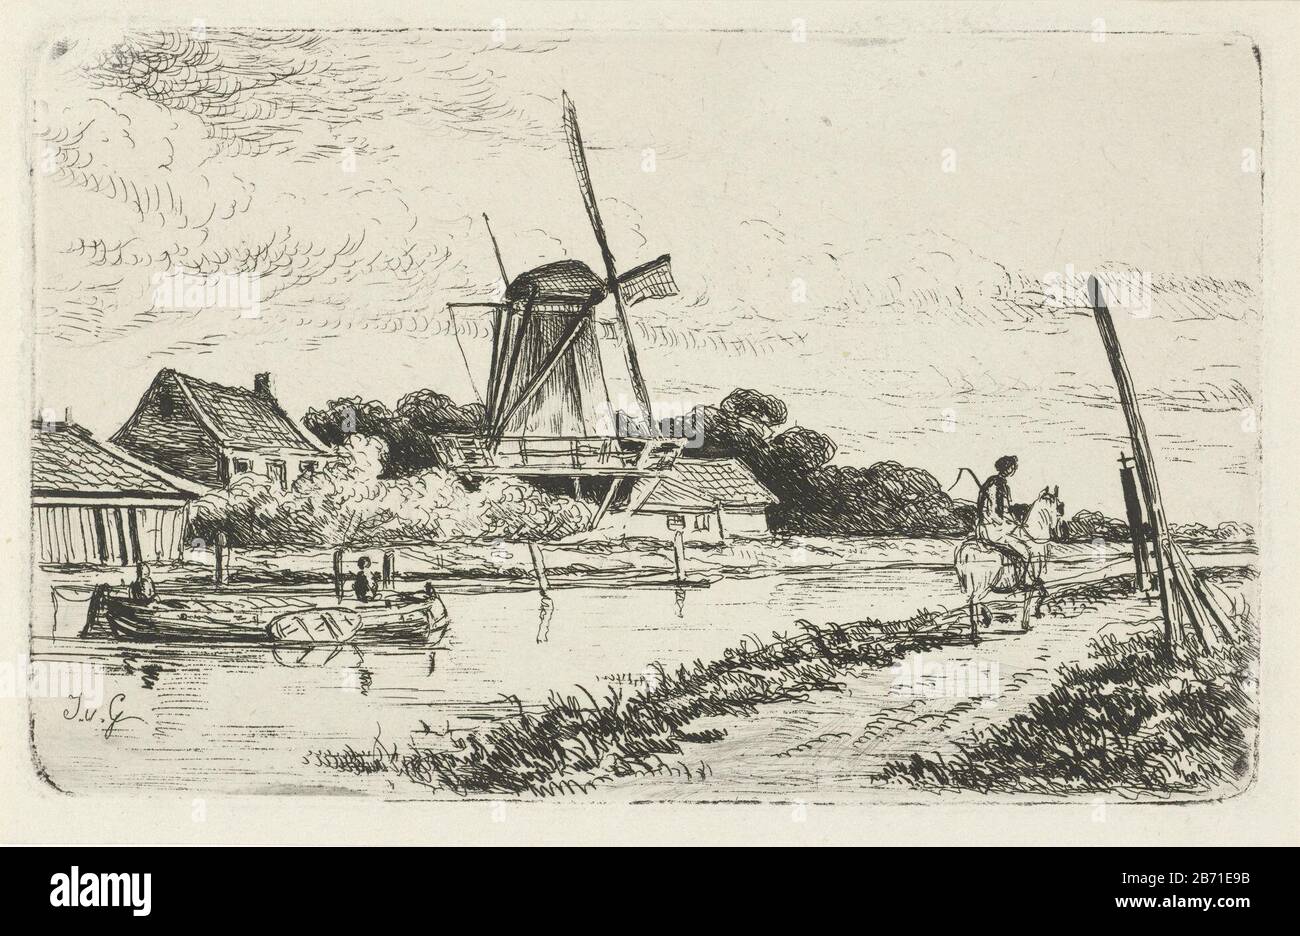 Landschap met een vaart en een windmolen Landscape with a road that runs along a canal . On the way a rider. In the background a windmolen. Manufacturer : printmaker: Jacobus van Gorkom Jr. (listed property) Place manufacture: Rotterdam Date: 1837 - 1880 Physical characteristics:. Etching material: paper Technique: etching Dimensions: plate edge b 157 mm × H 99 mm Subject: canal (+ landscape with figures, staffage) windmill in landscape and Stock Photo